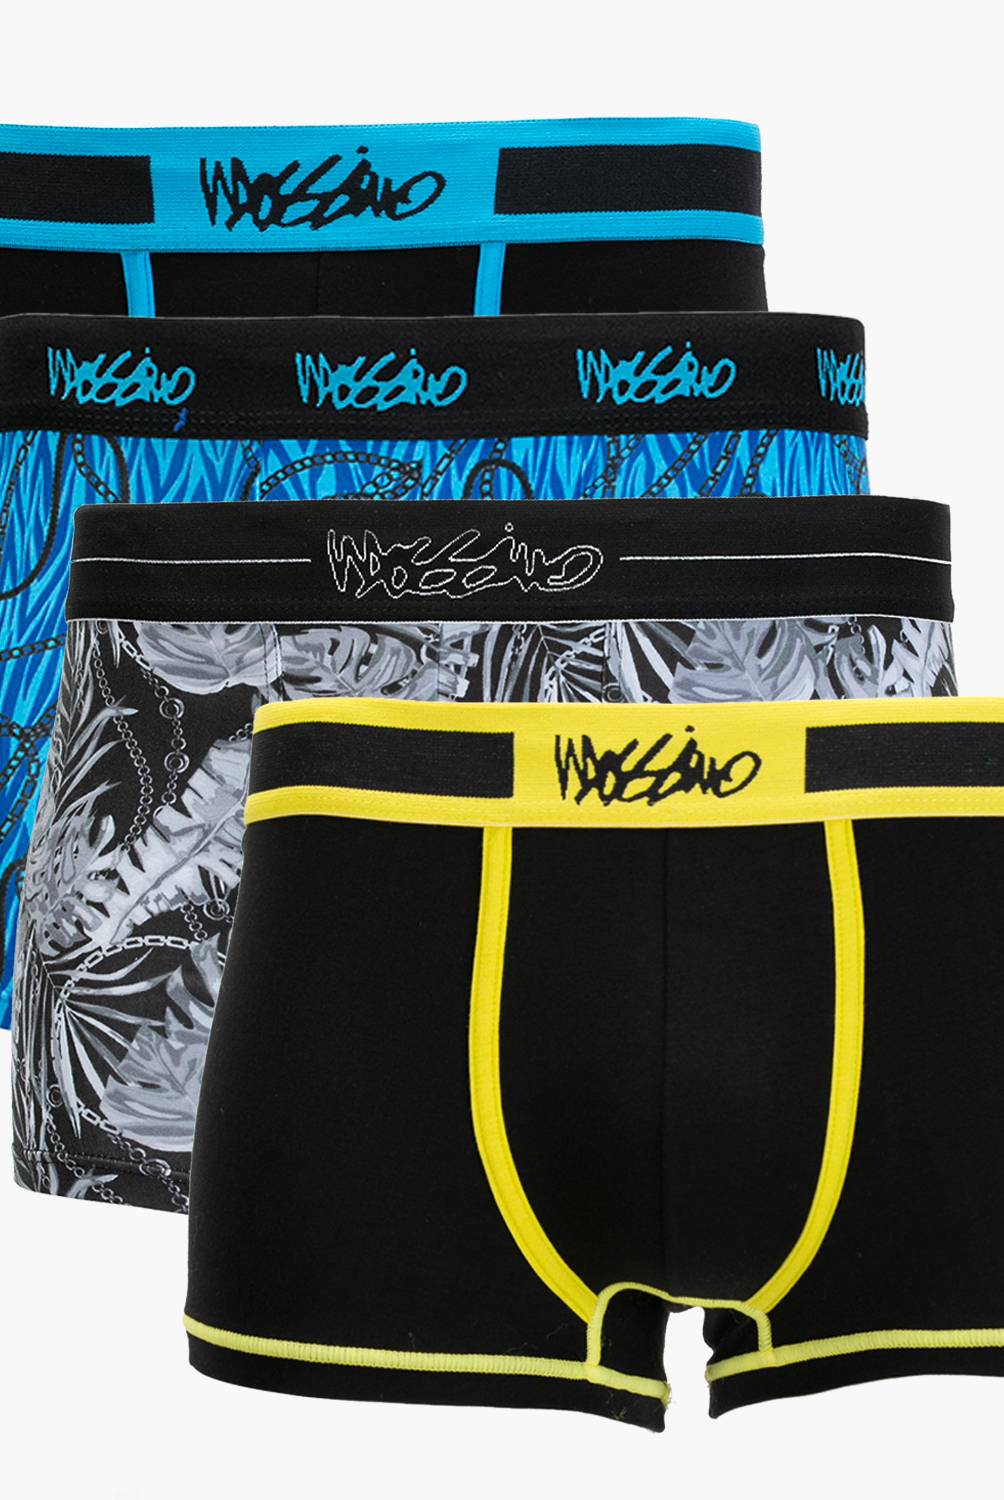 MOSSIMO - Boxer Pack x4 Hombre